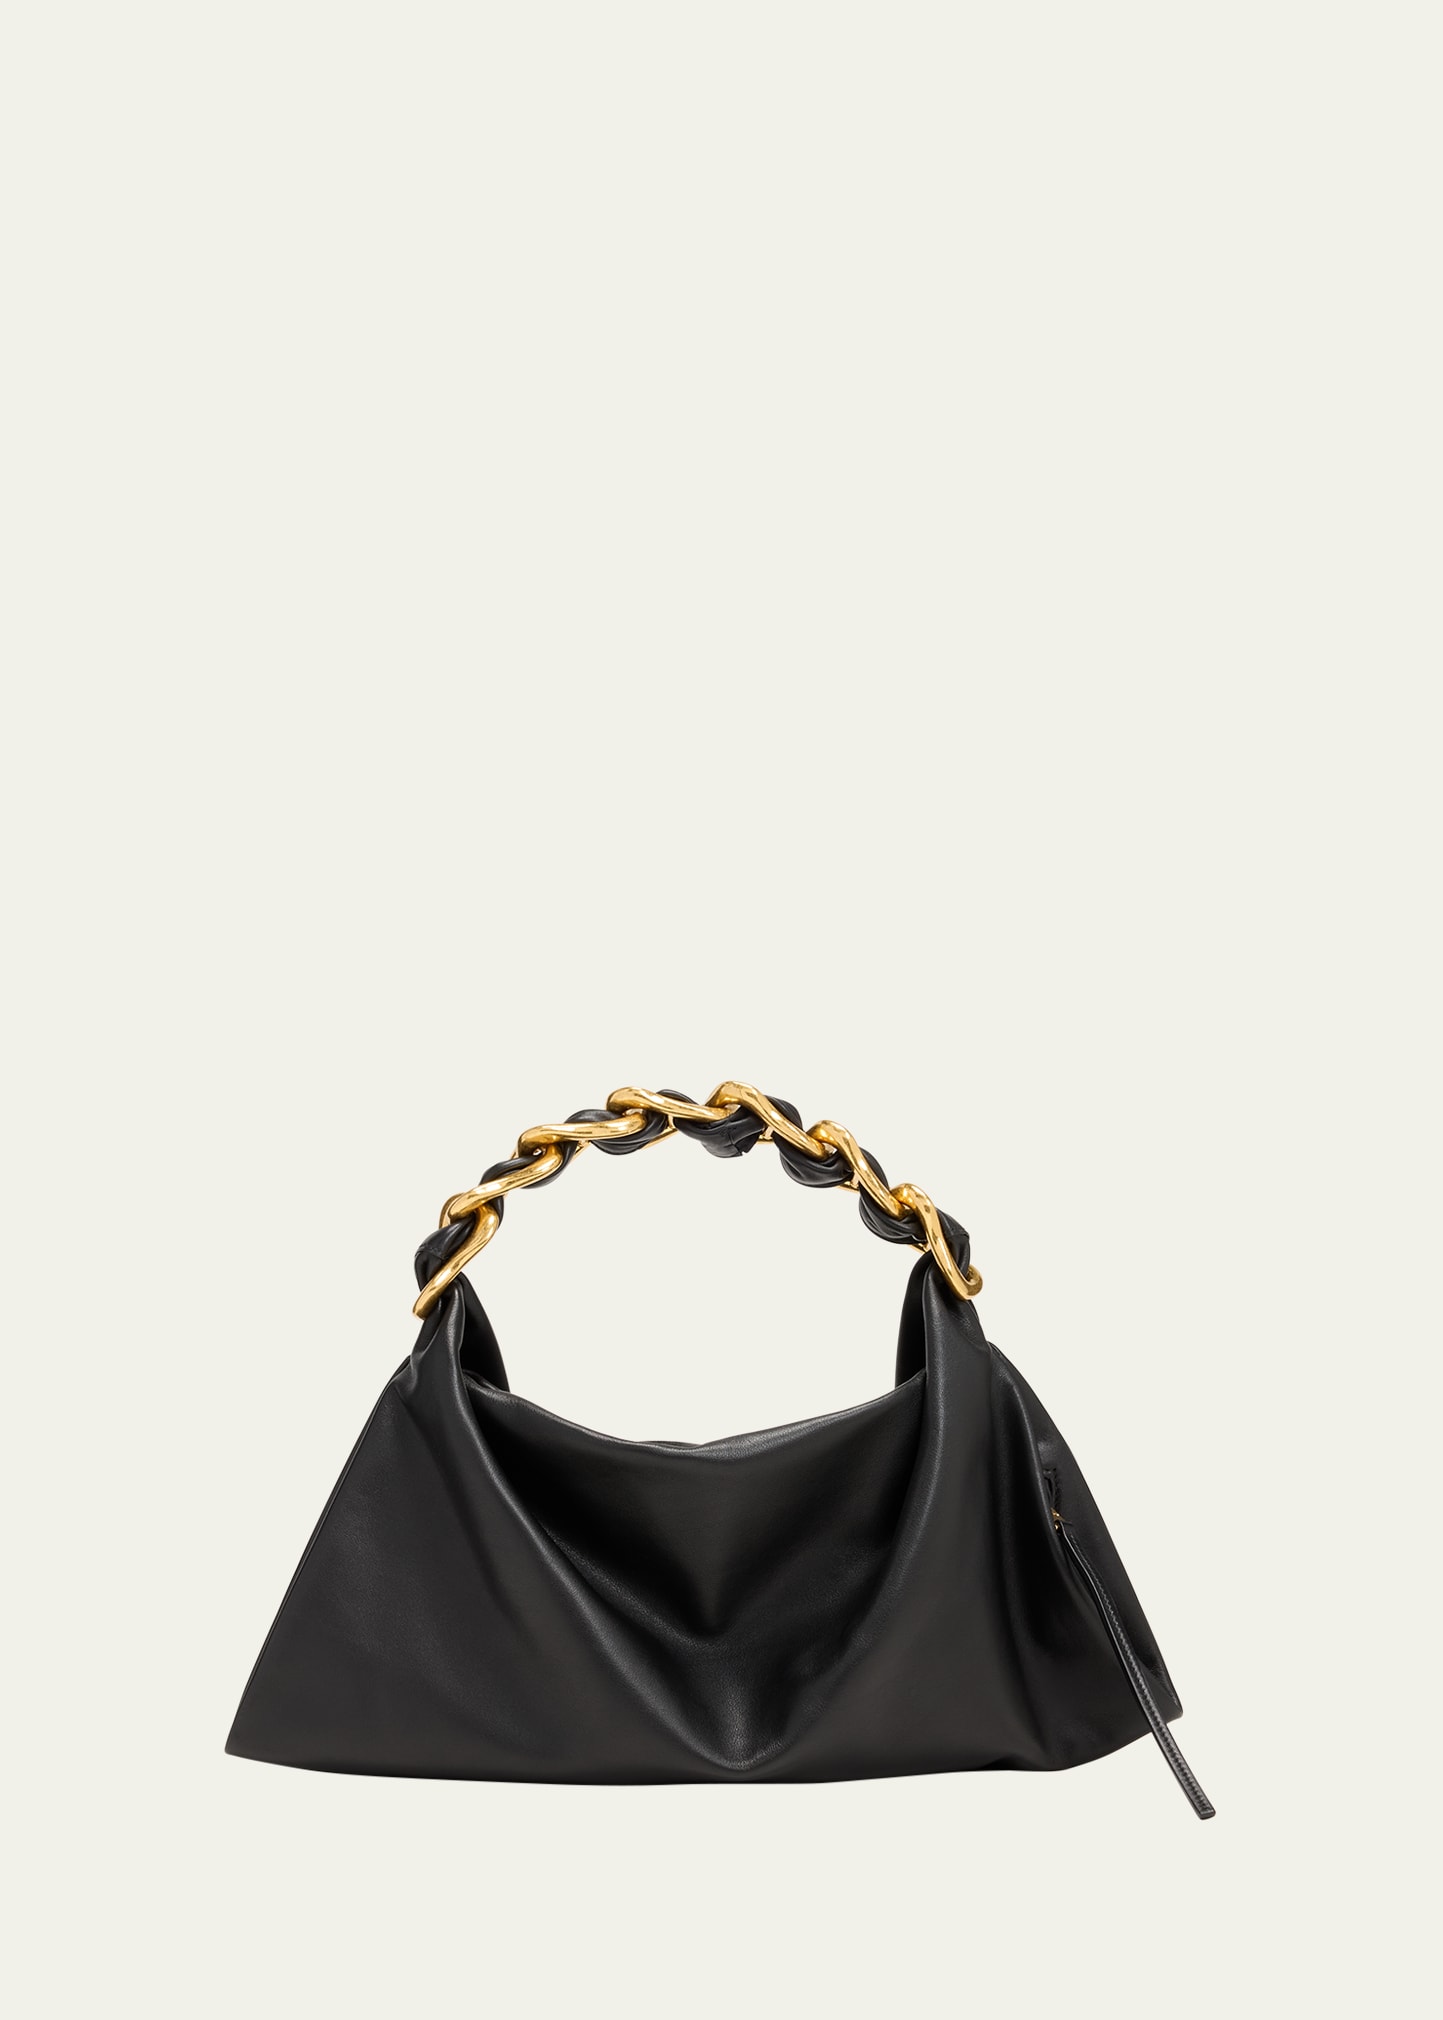 Burberry Swan Small Leather Shoulder Bag In Black